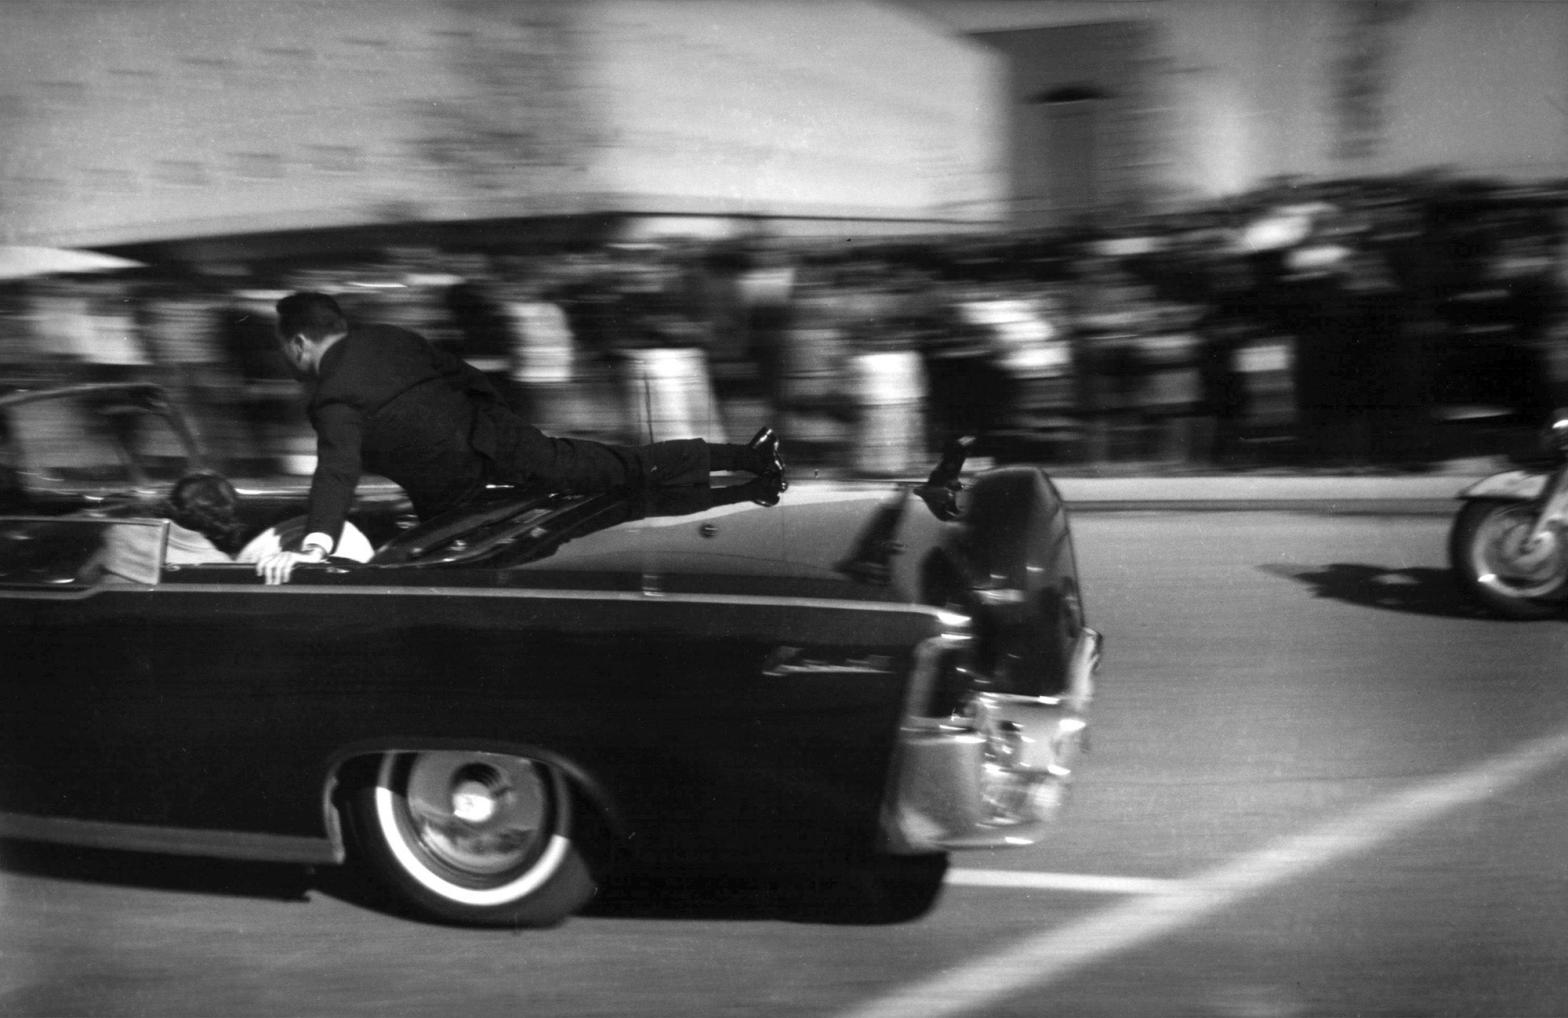 The limousine carrying President John F. Kennedy races toward the hospital seconds after he was shot in Dallas on Nov. 22, 1963. (Photo: Justin Newman, AP)